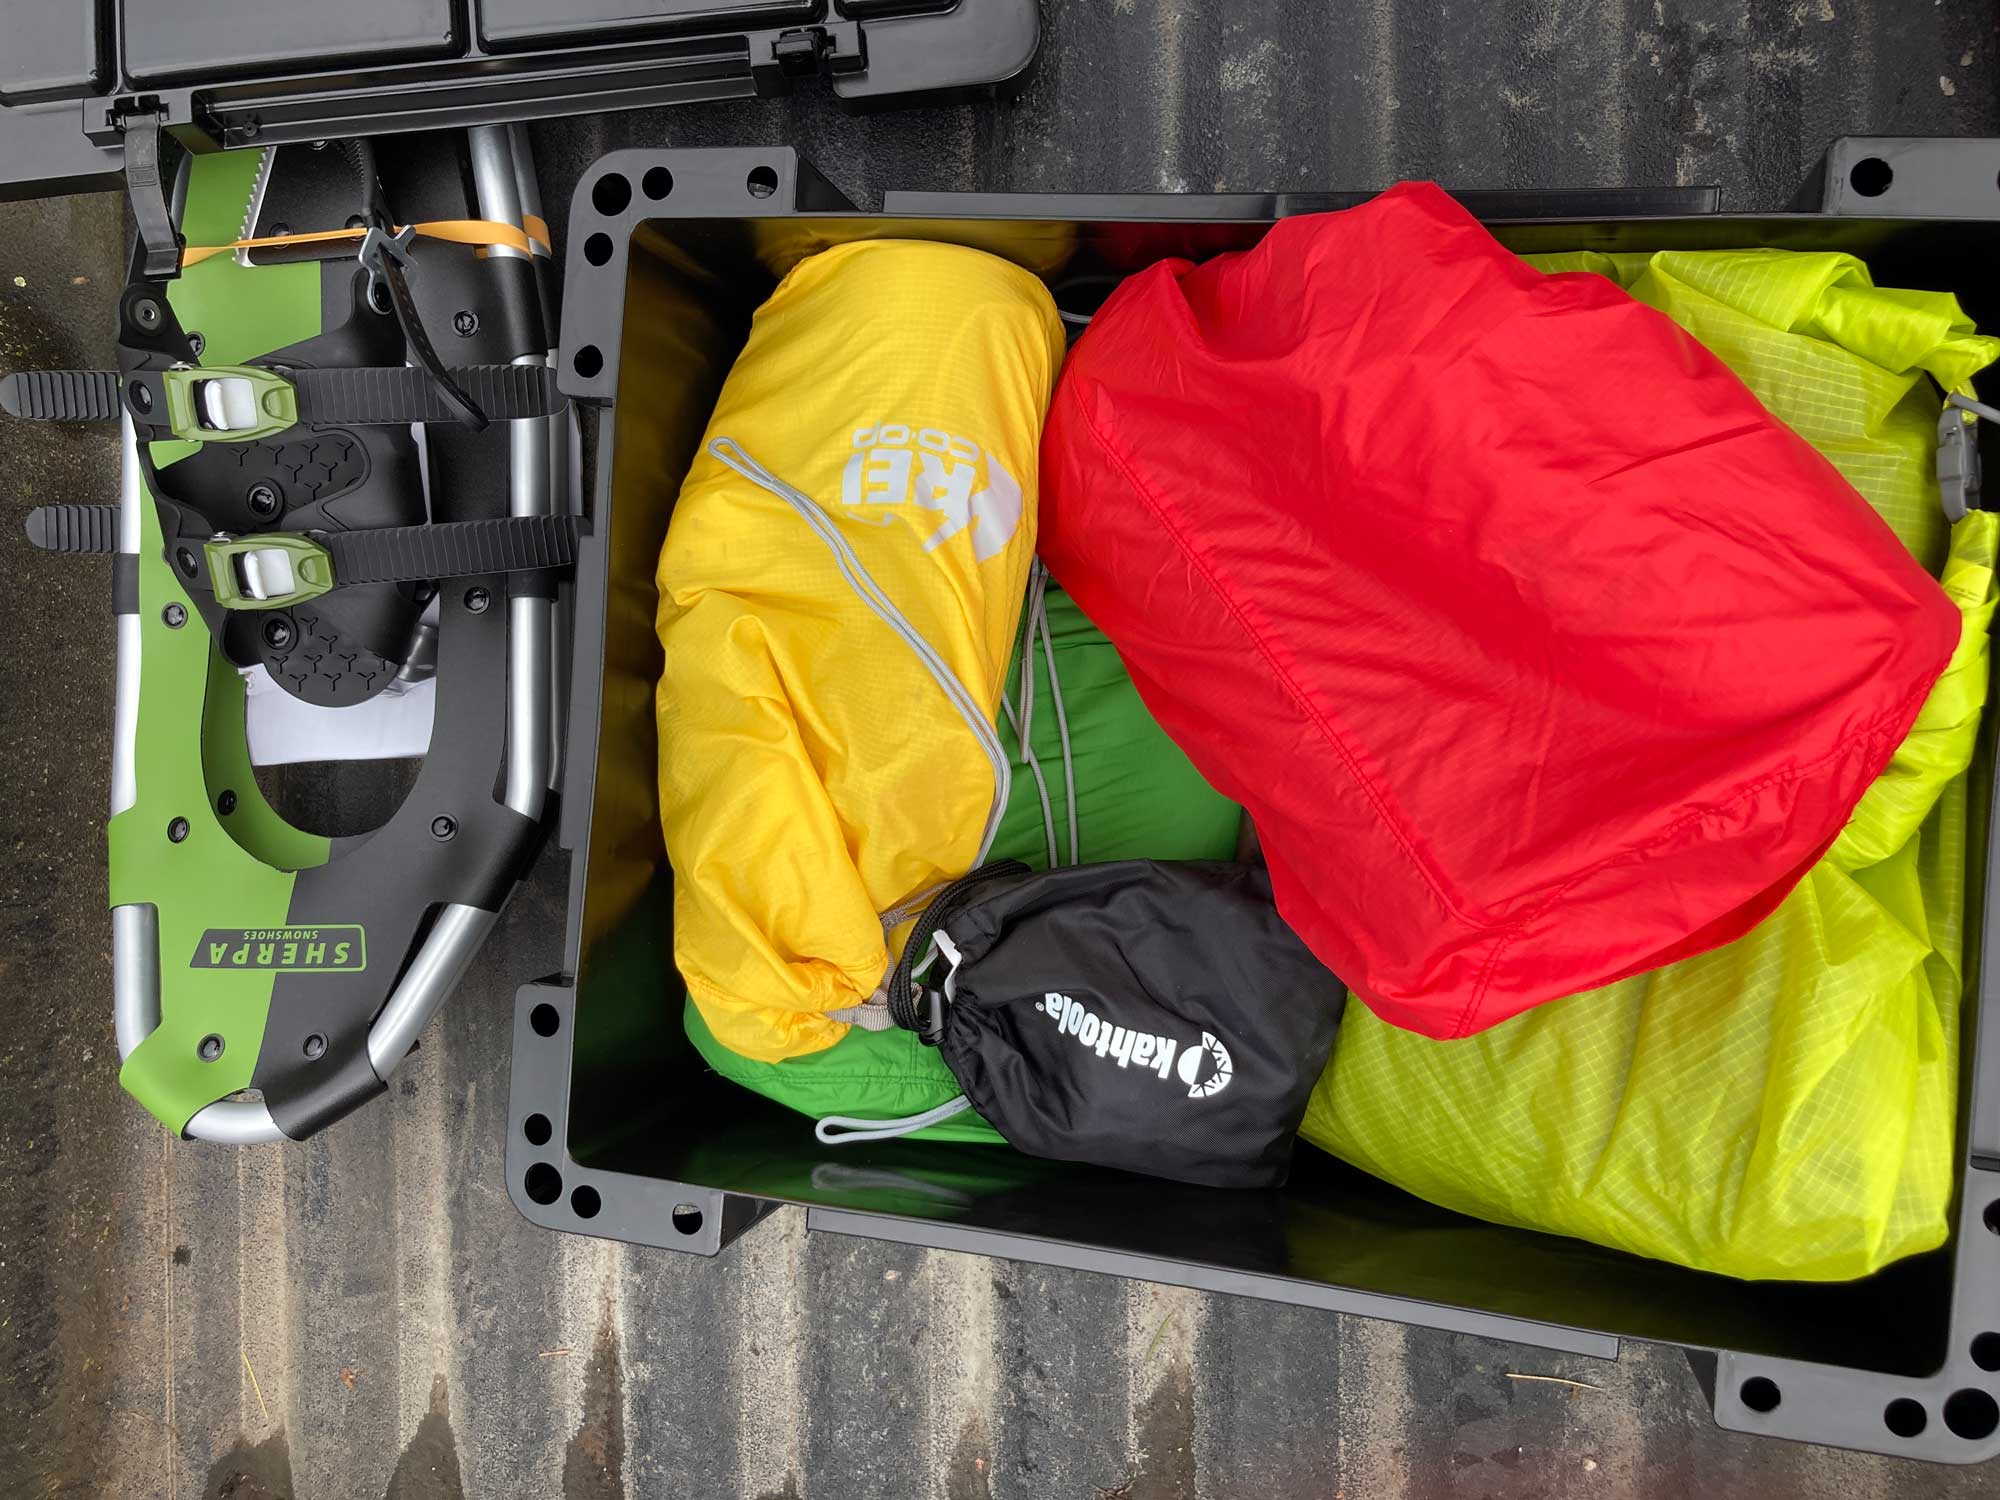 Snowshoes, red, green, yellow, blag bags containing search and rescue gear